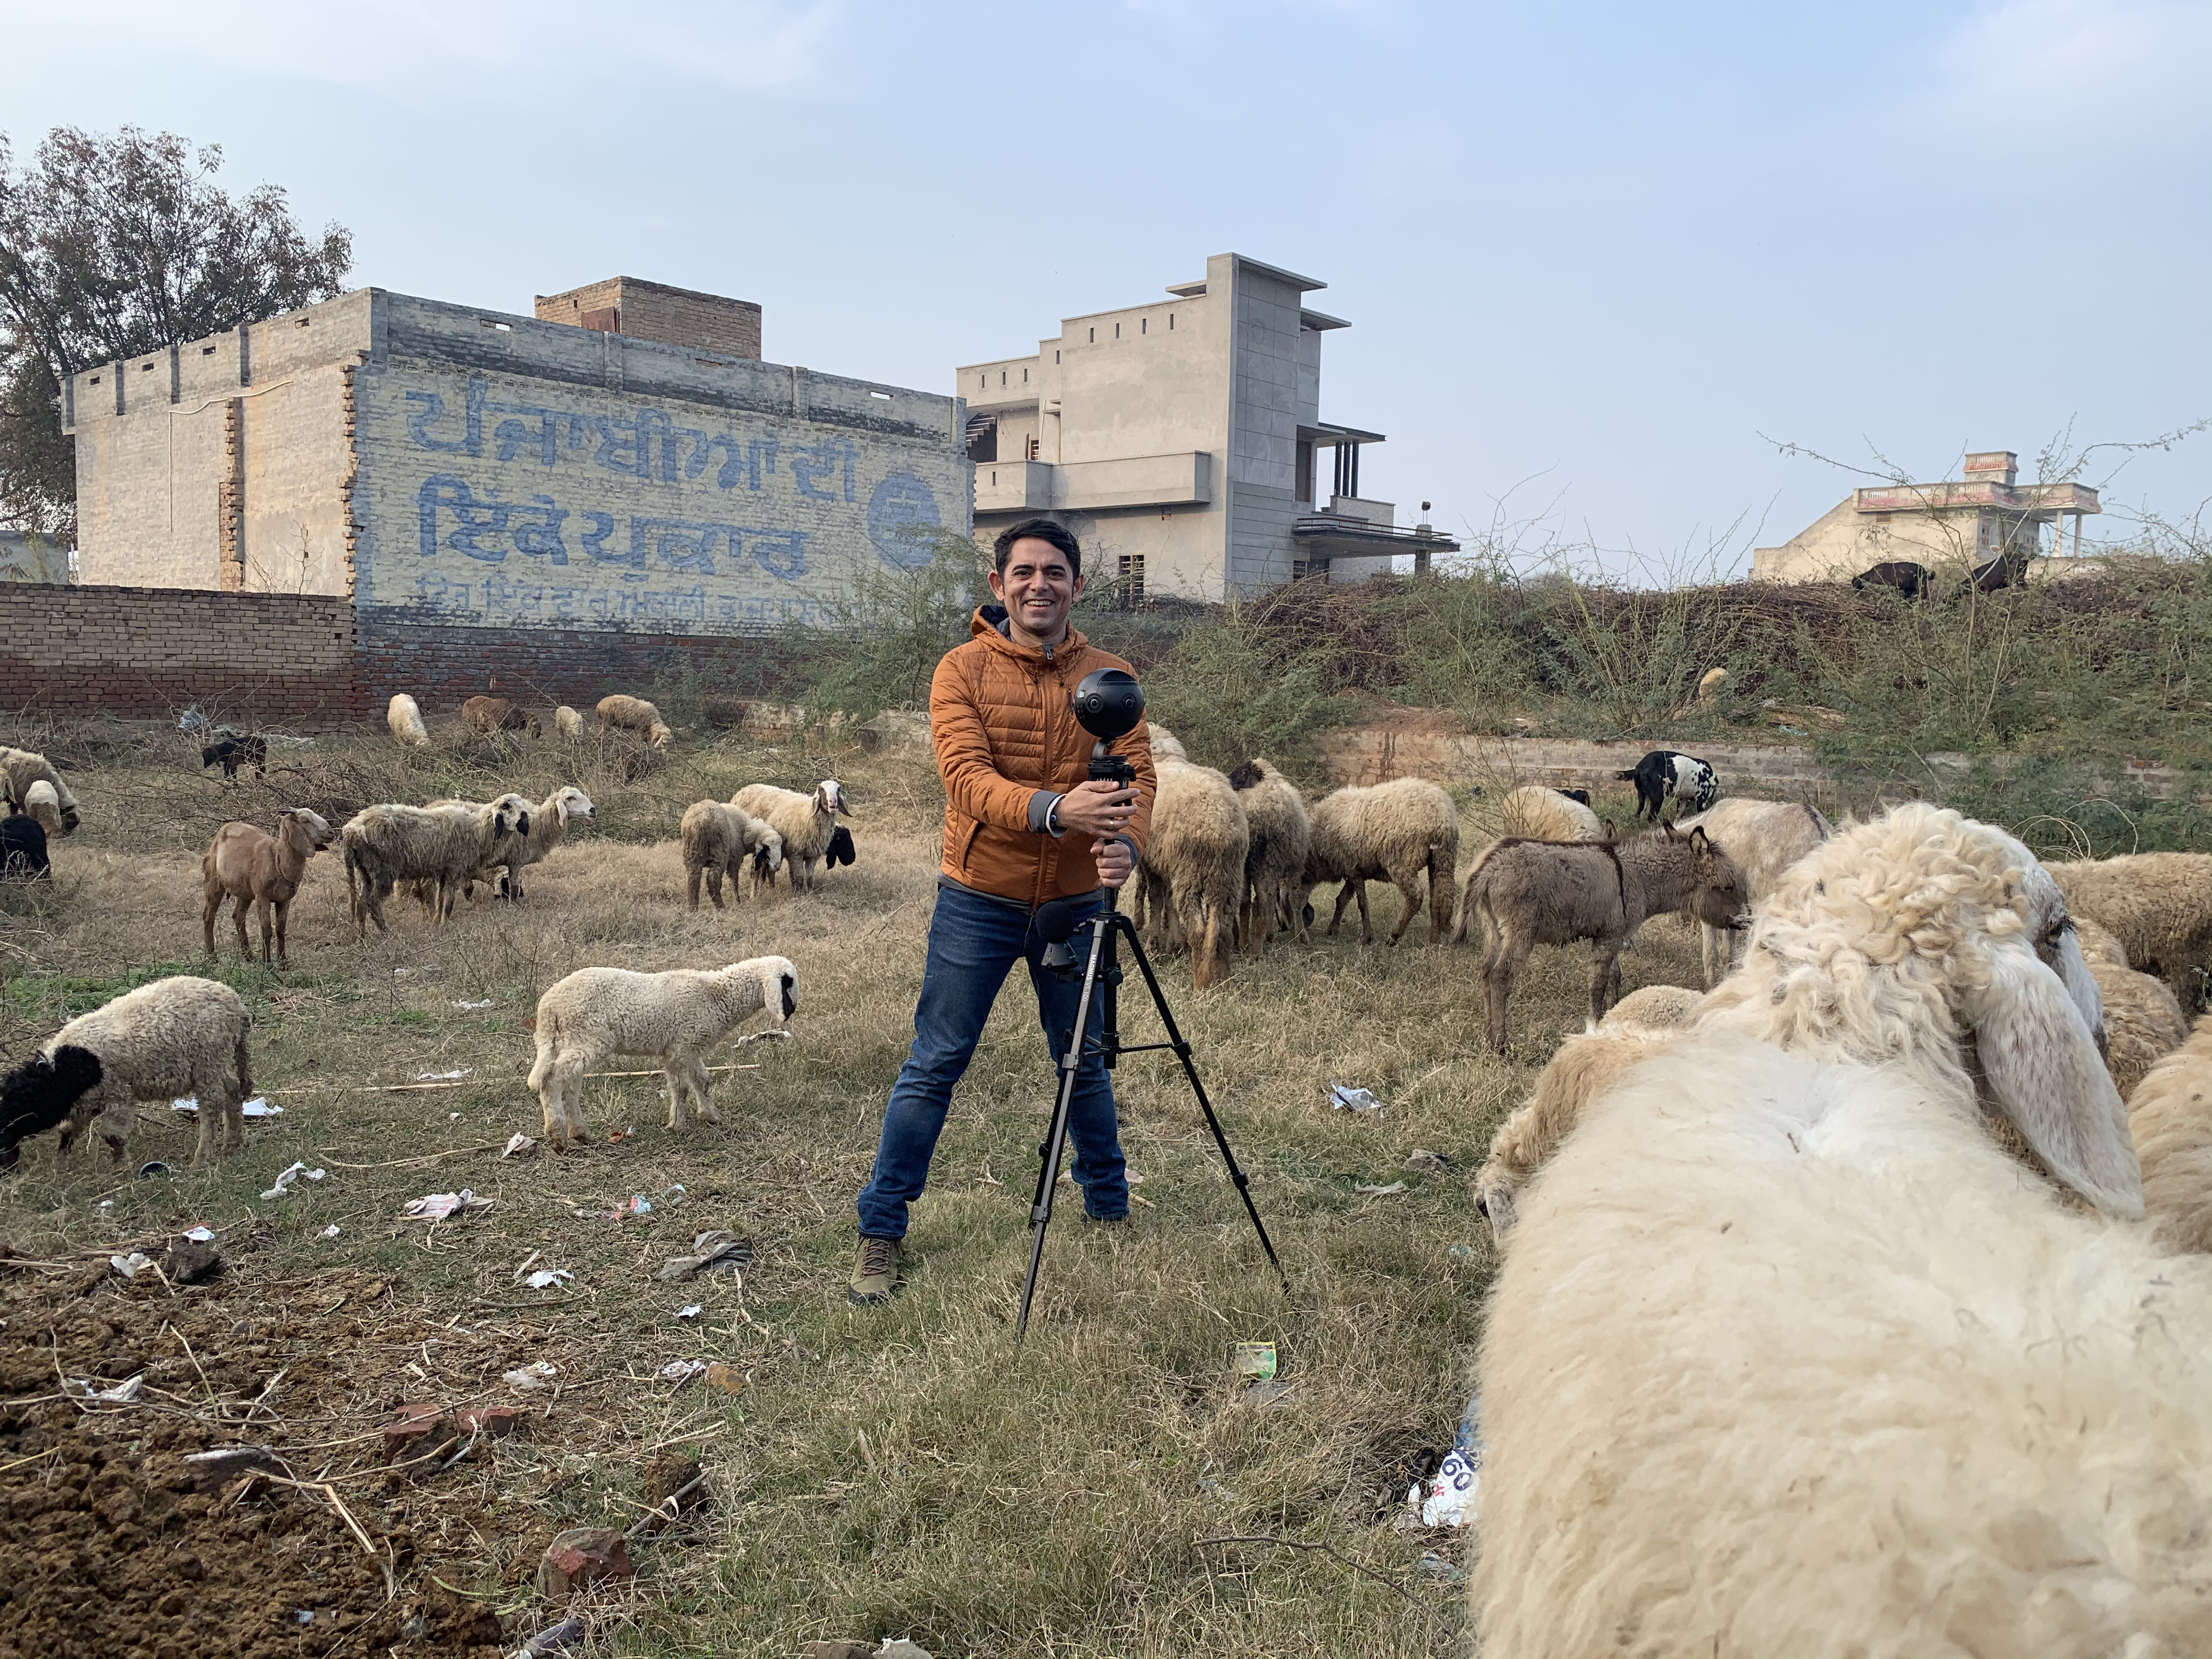 Harjant Gill stands with a tripod in a field with sheep